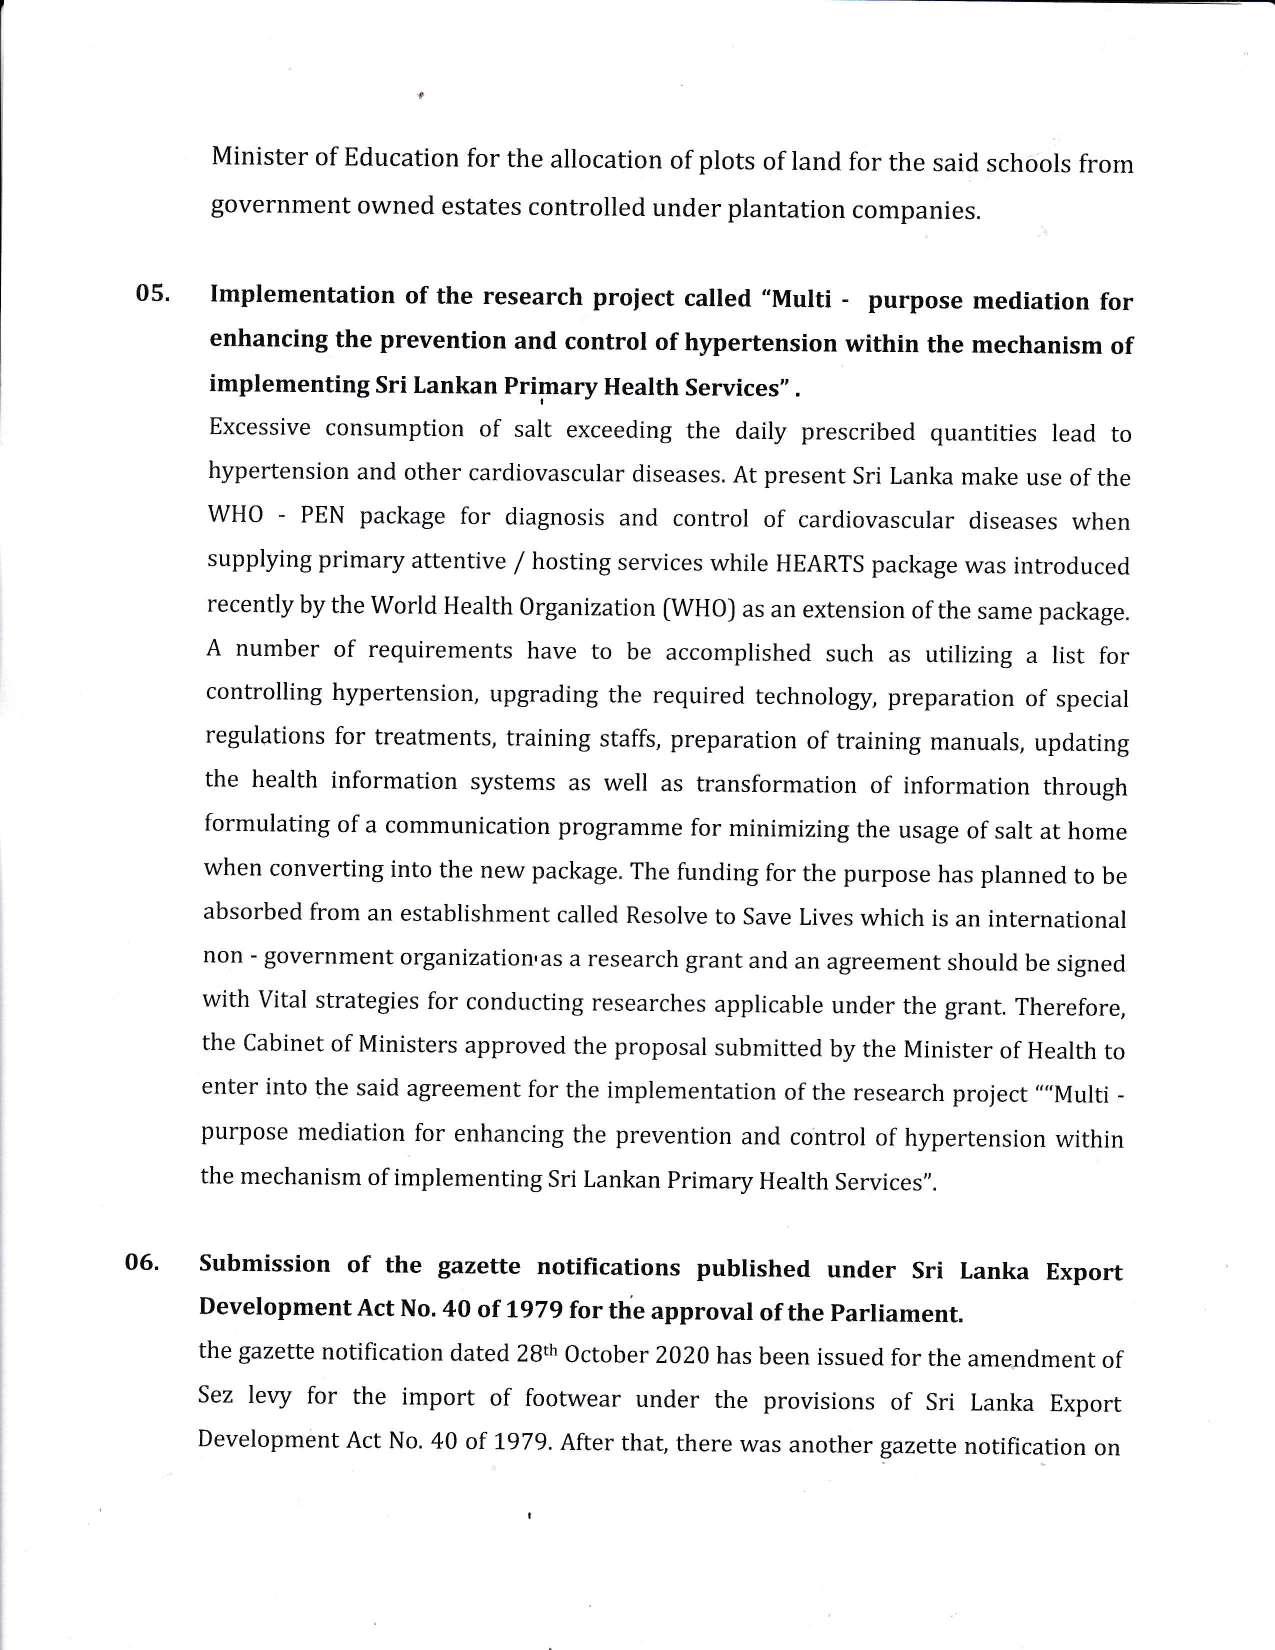 Cabinet Decision on 11.01.2021 English page 003